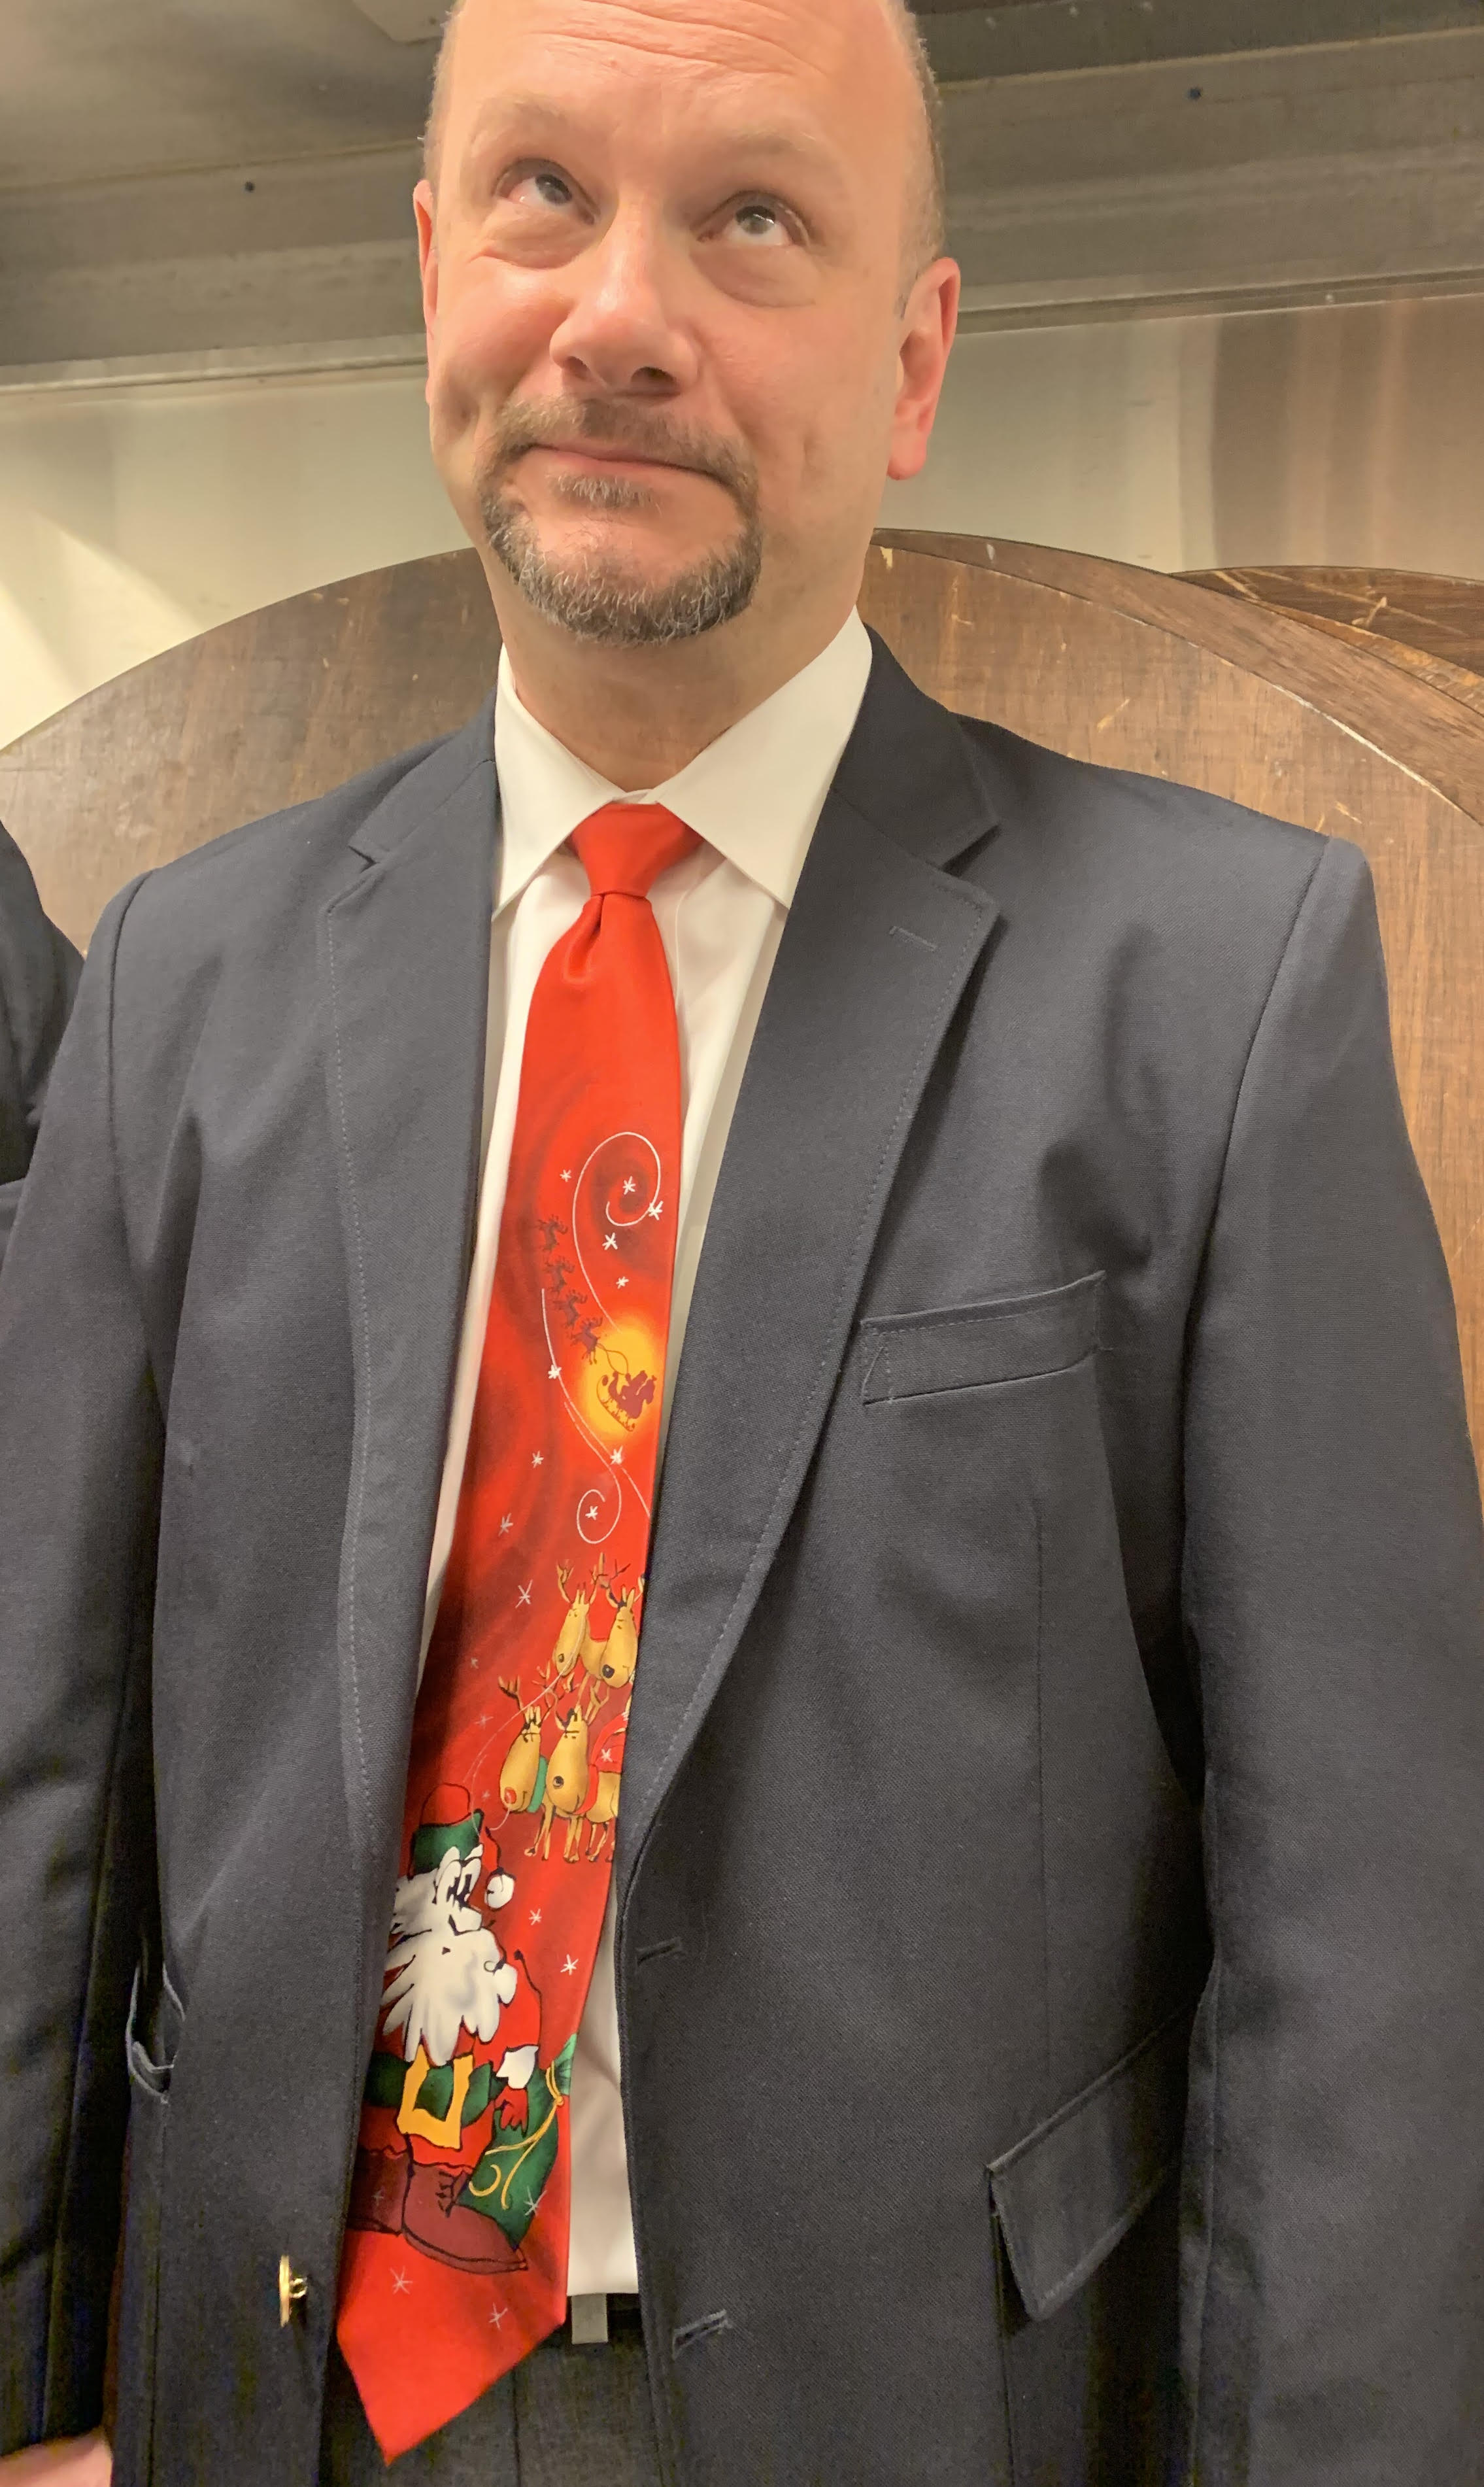 Director Craig in The Christmas 2019 Show Garb